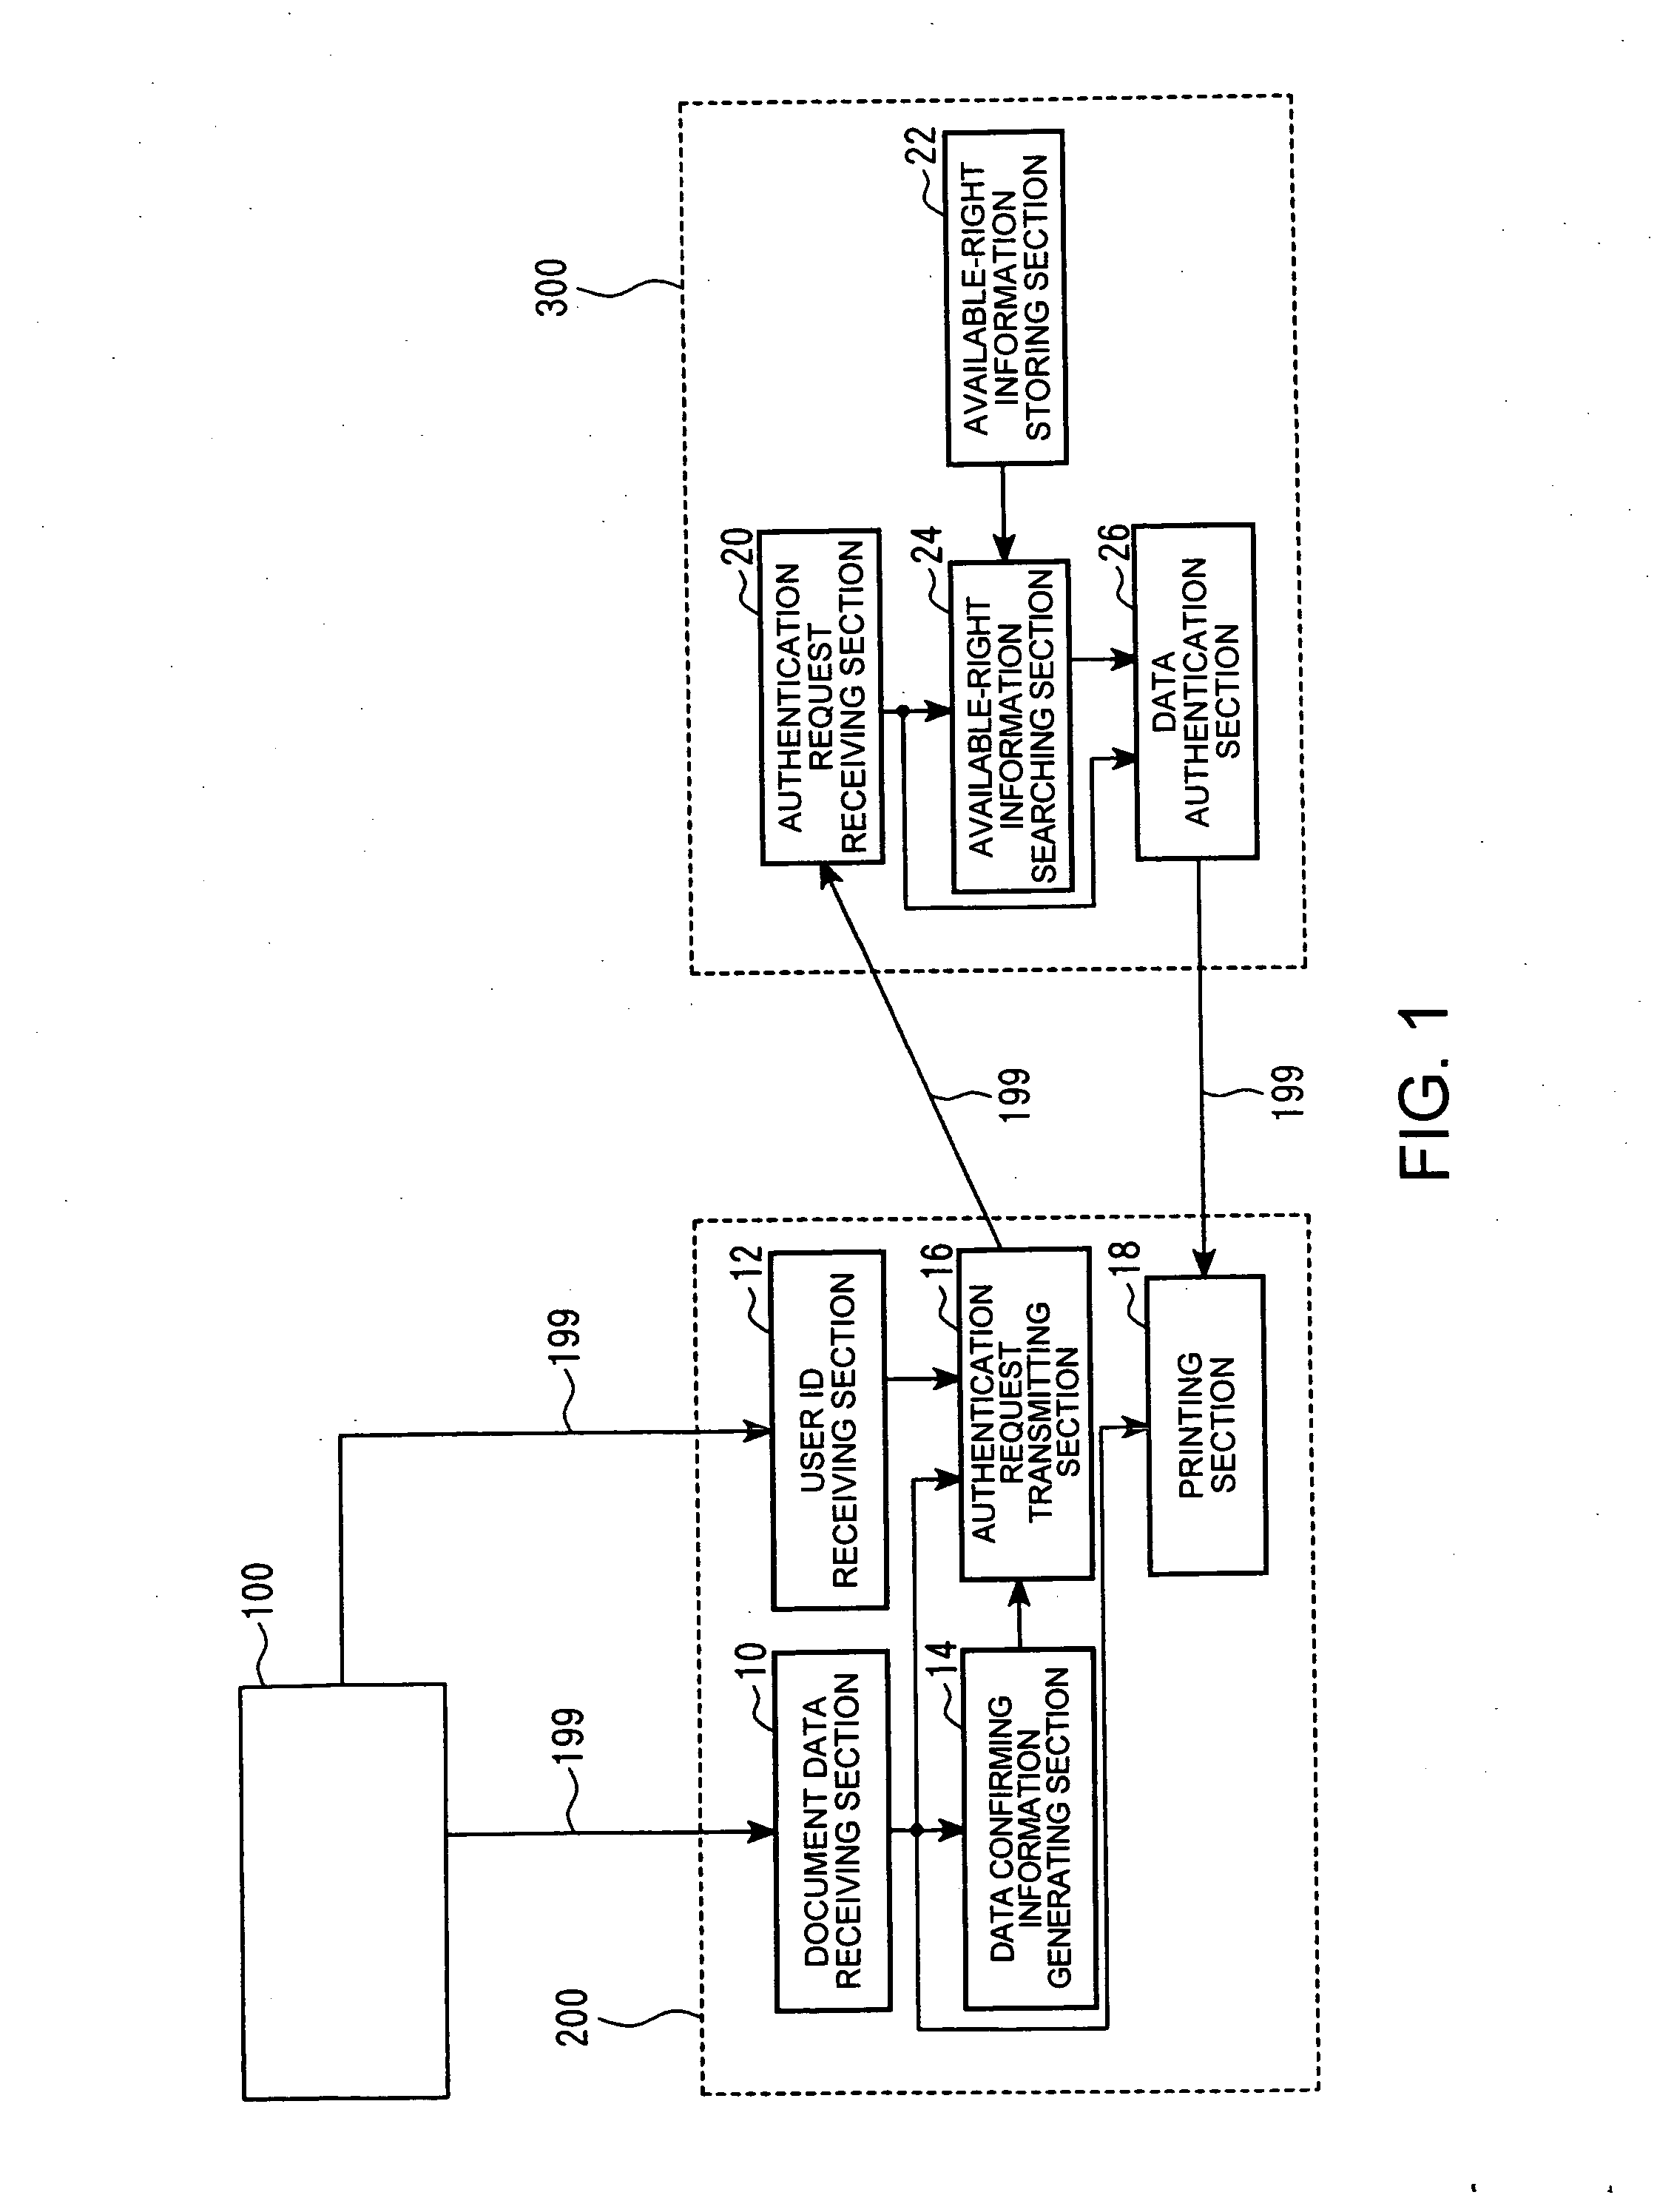 License-authentication functioned output system, output apparatus, data authentication apparatus, design resource output program, data authentication program and license authentication output method